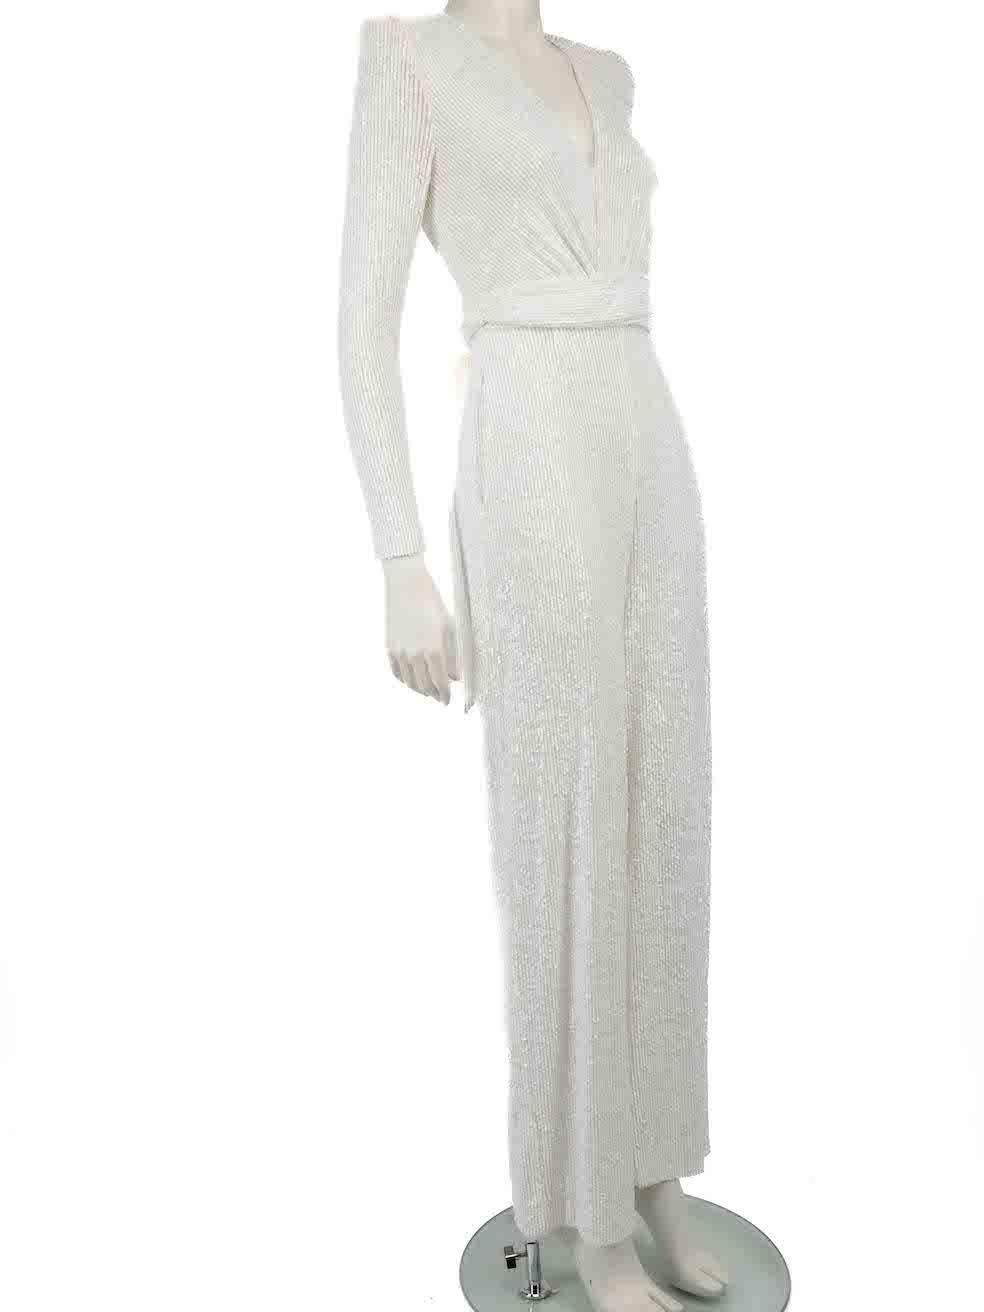 CONDITION is Very good. Hardly any visible wear to jumpsuit is evident on this used Naeem Khan designer resale item.
 
 
 
 Details
 
 
 White
 
 Synthetic
 
 Jumpsuit
 
 Sequinned
 
 Long sleeves
 
 Shoulder pads
 
 V-neck
 
 Waist tie belt
 
 Back